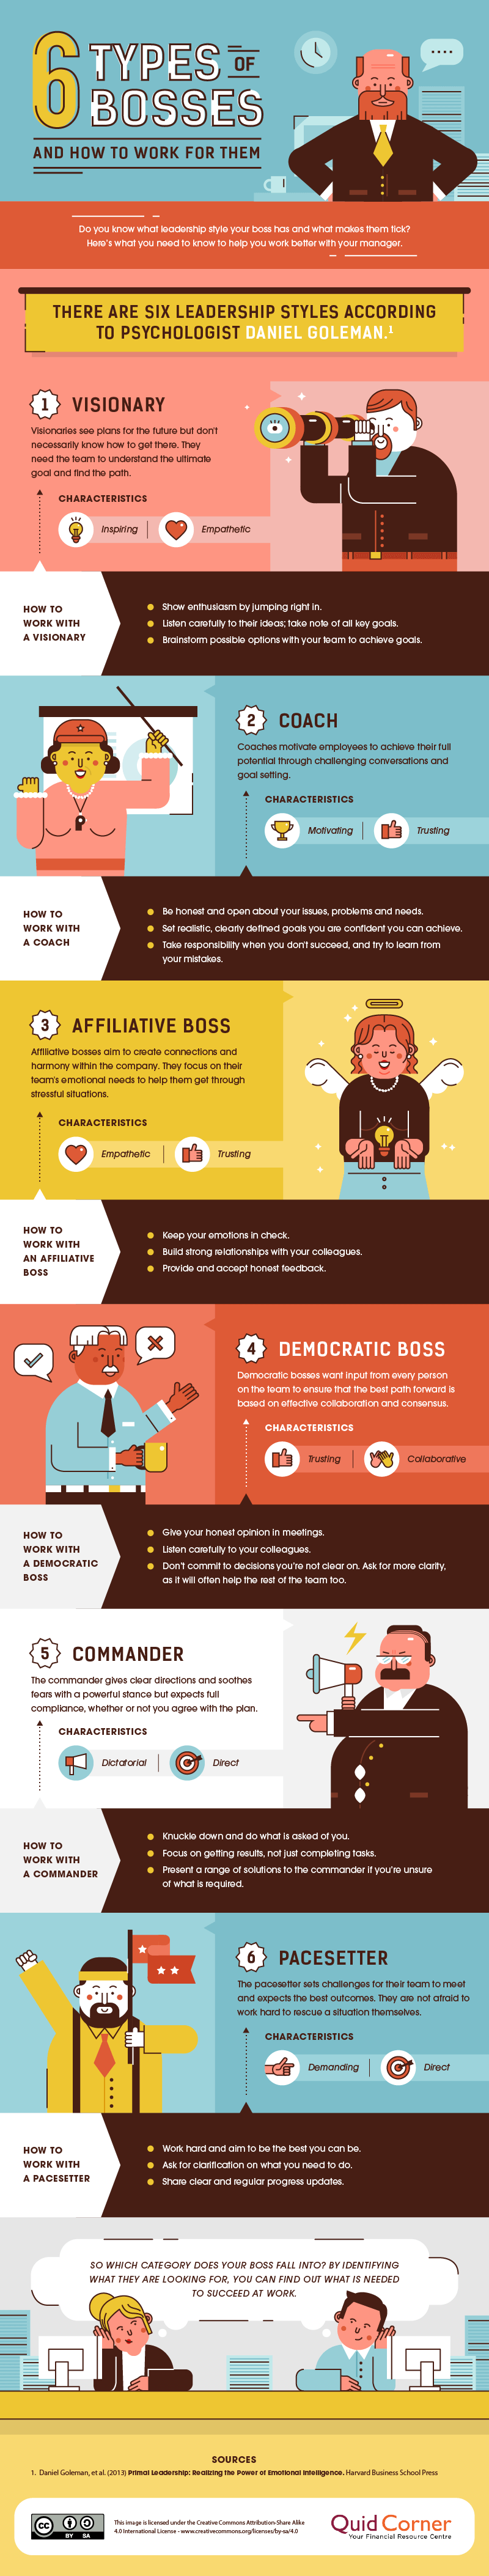 https://www.quickquid.co.uk/quid-corner/wp-content/uploads/2017/06/DESIGN-6-types-of-bosses-and-how-to-work-for-them.png